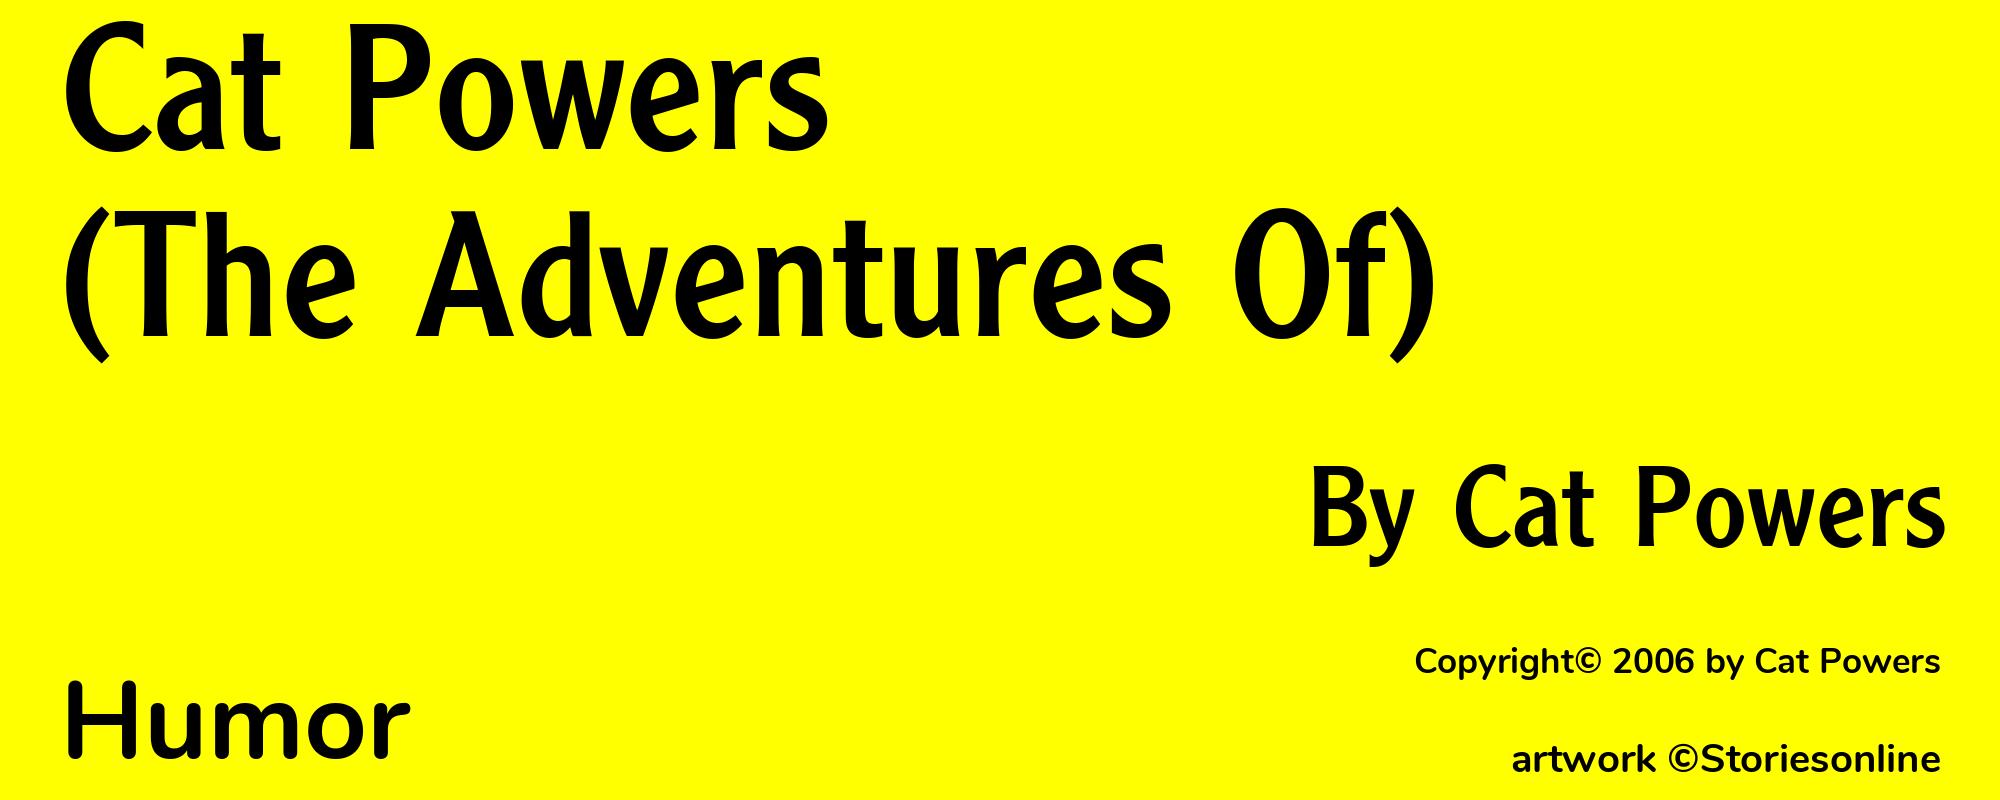 Cat Powers (The Adventures Of) - Cover